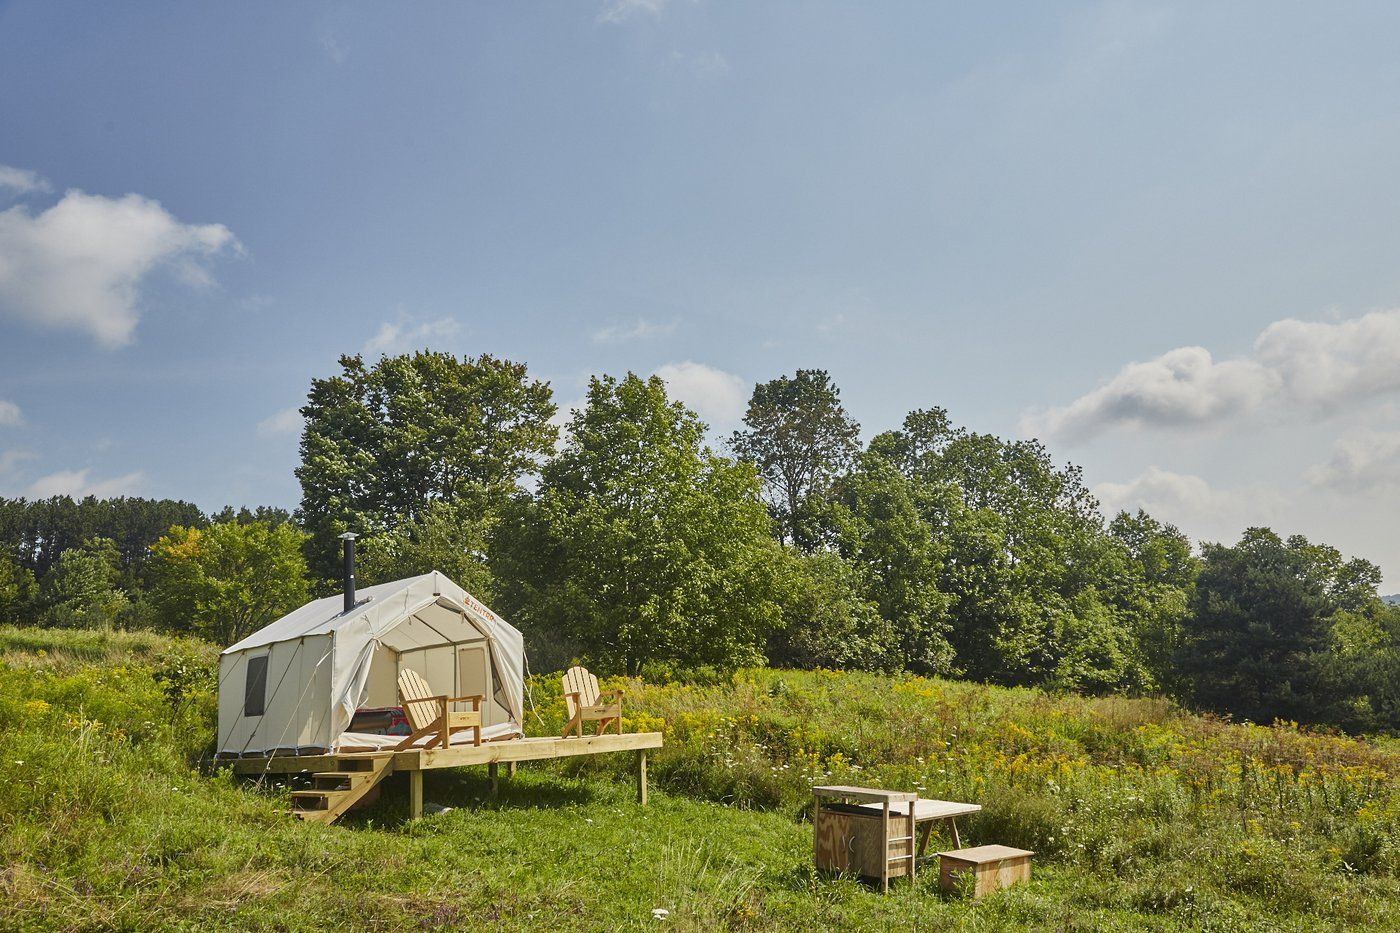 Introducing...Our New Campsites!